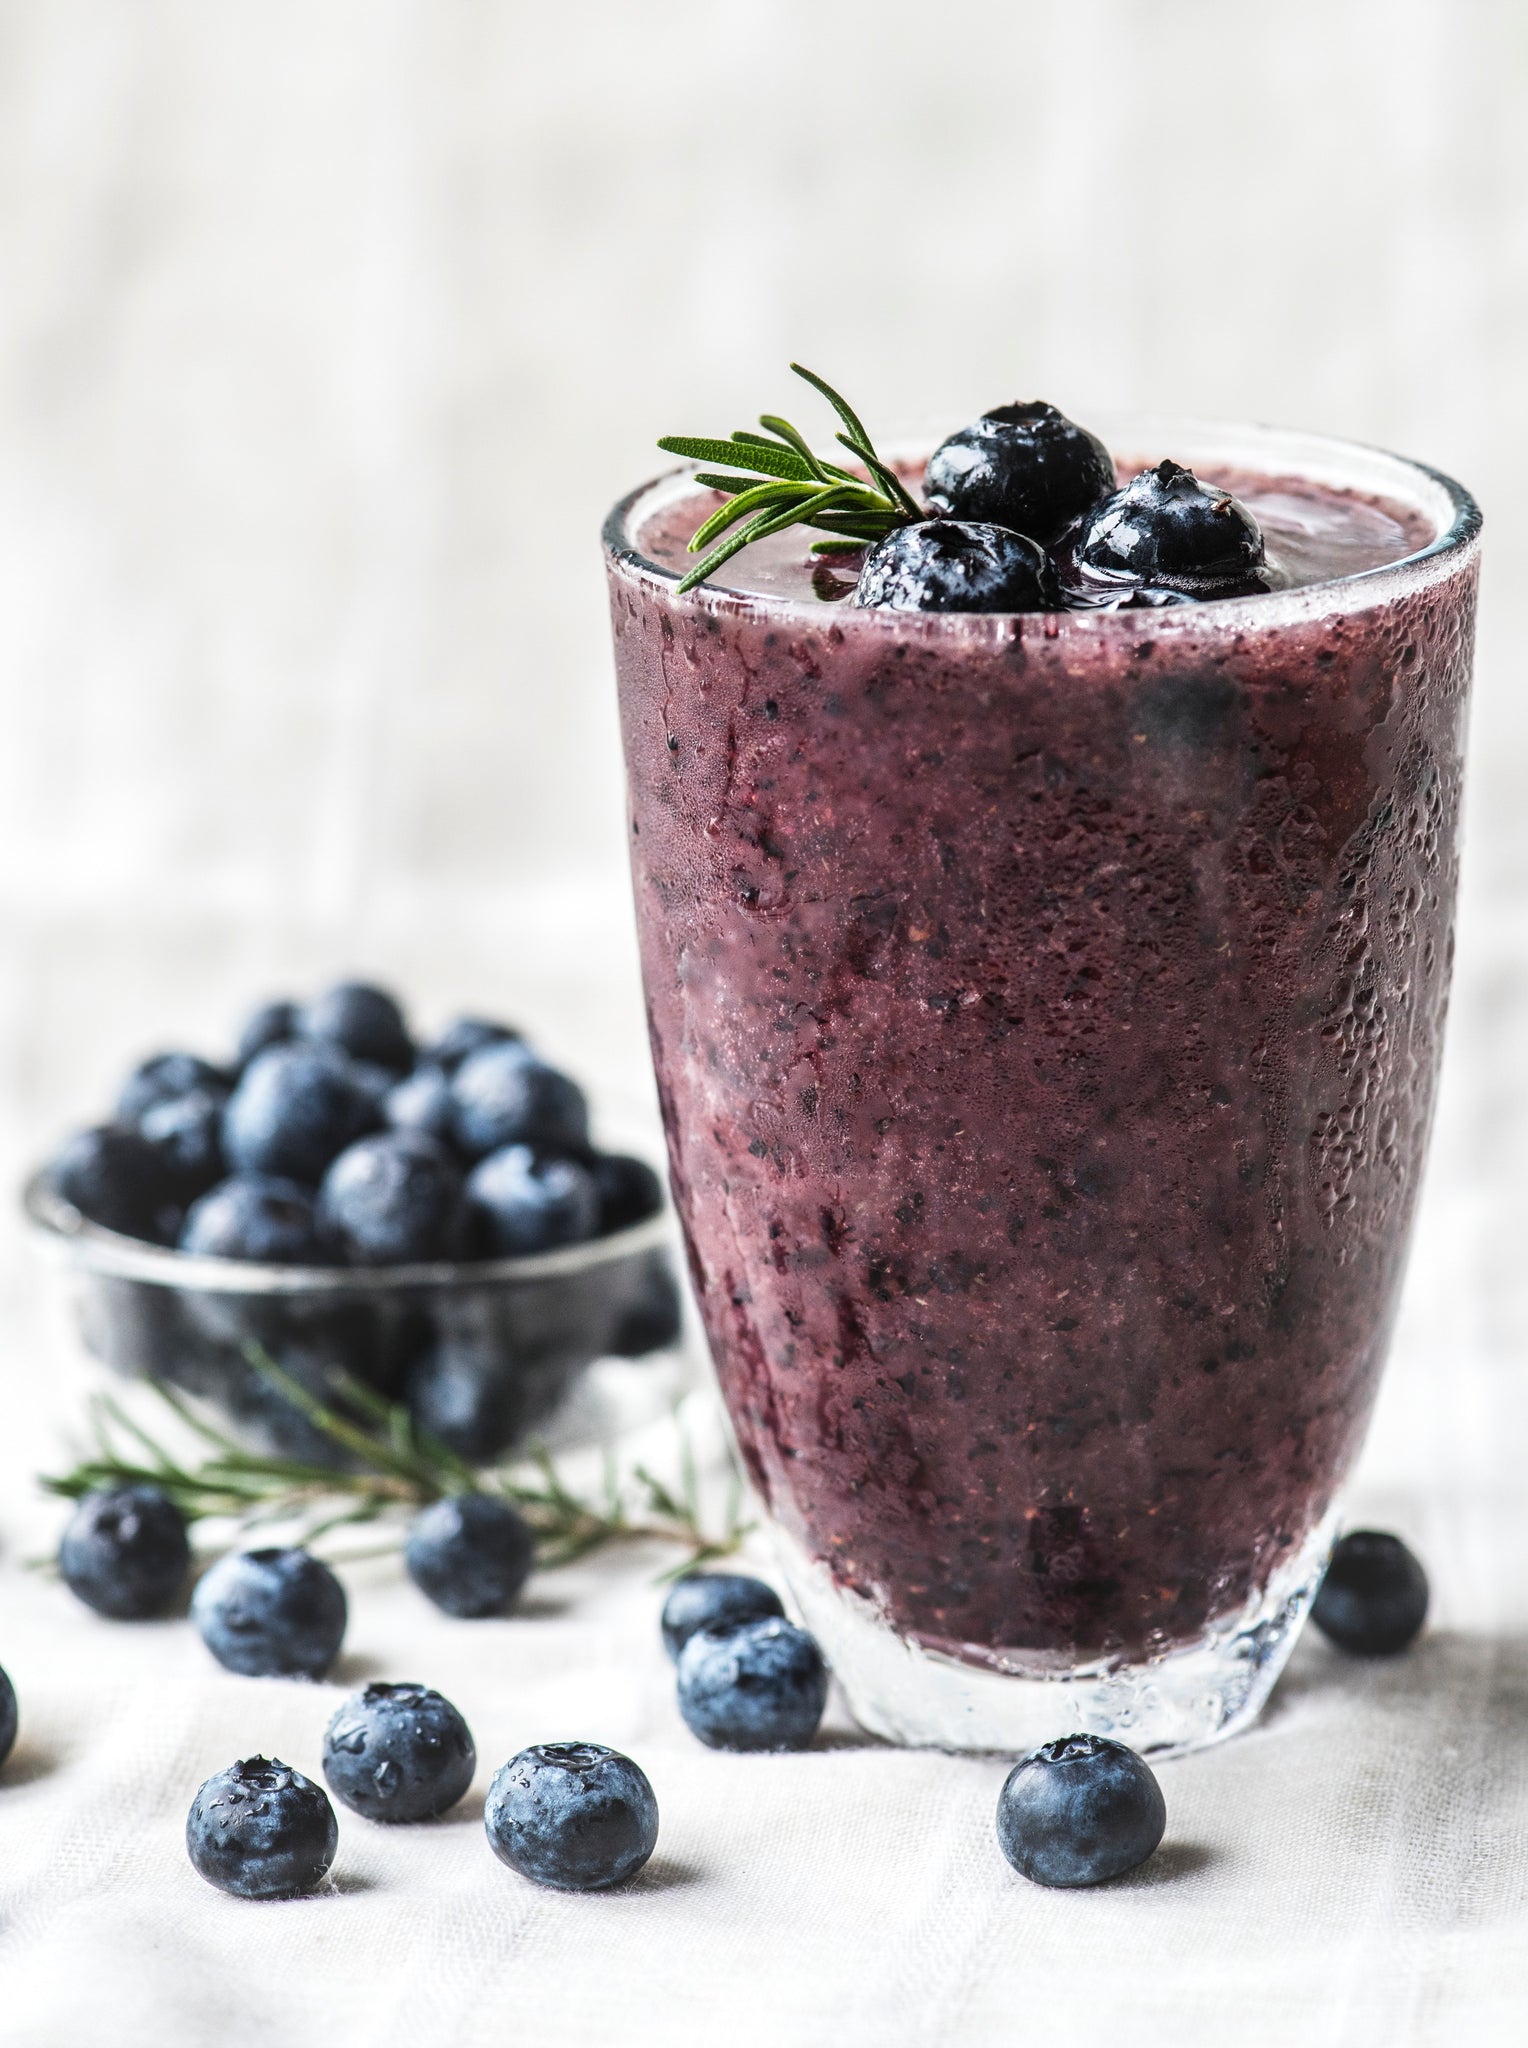 Post workout snack - berry smoothie